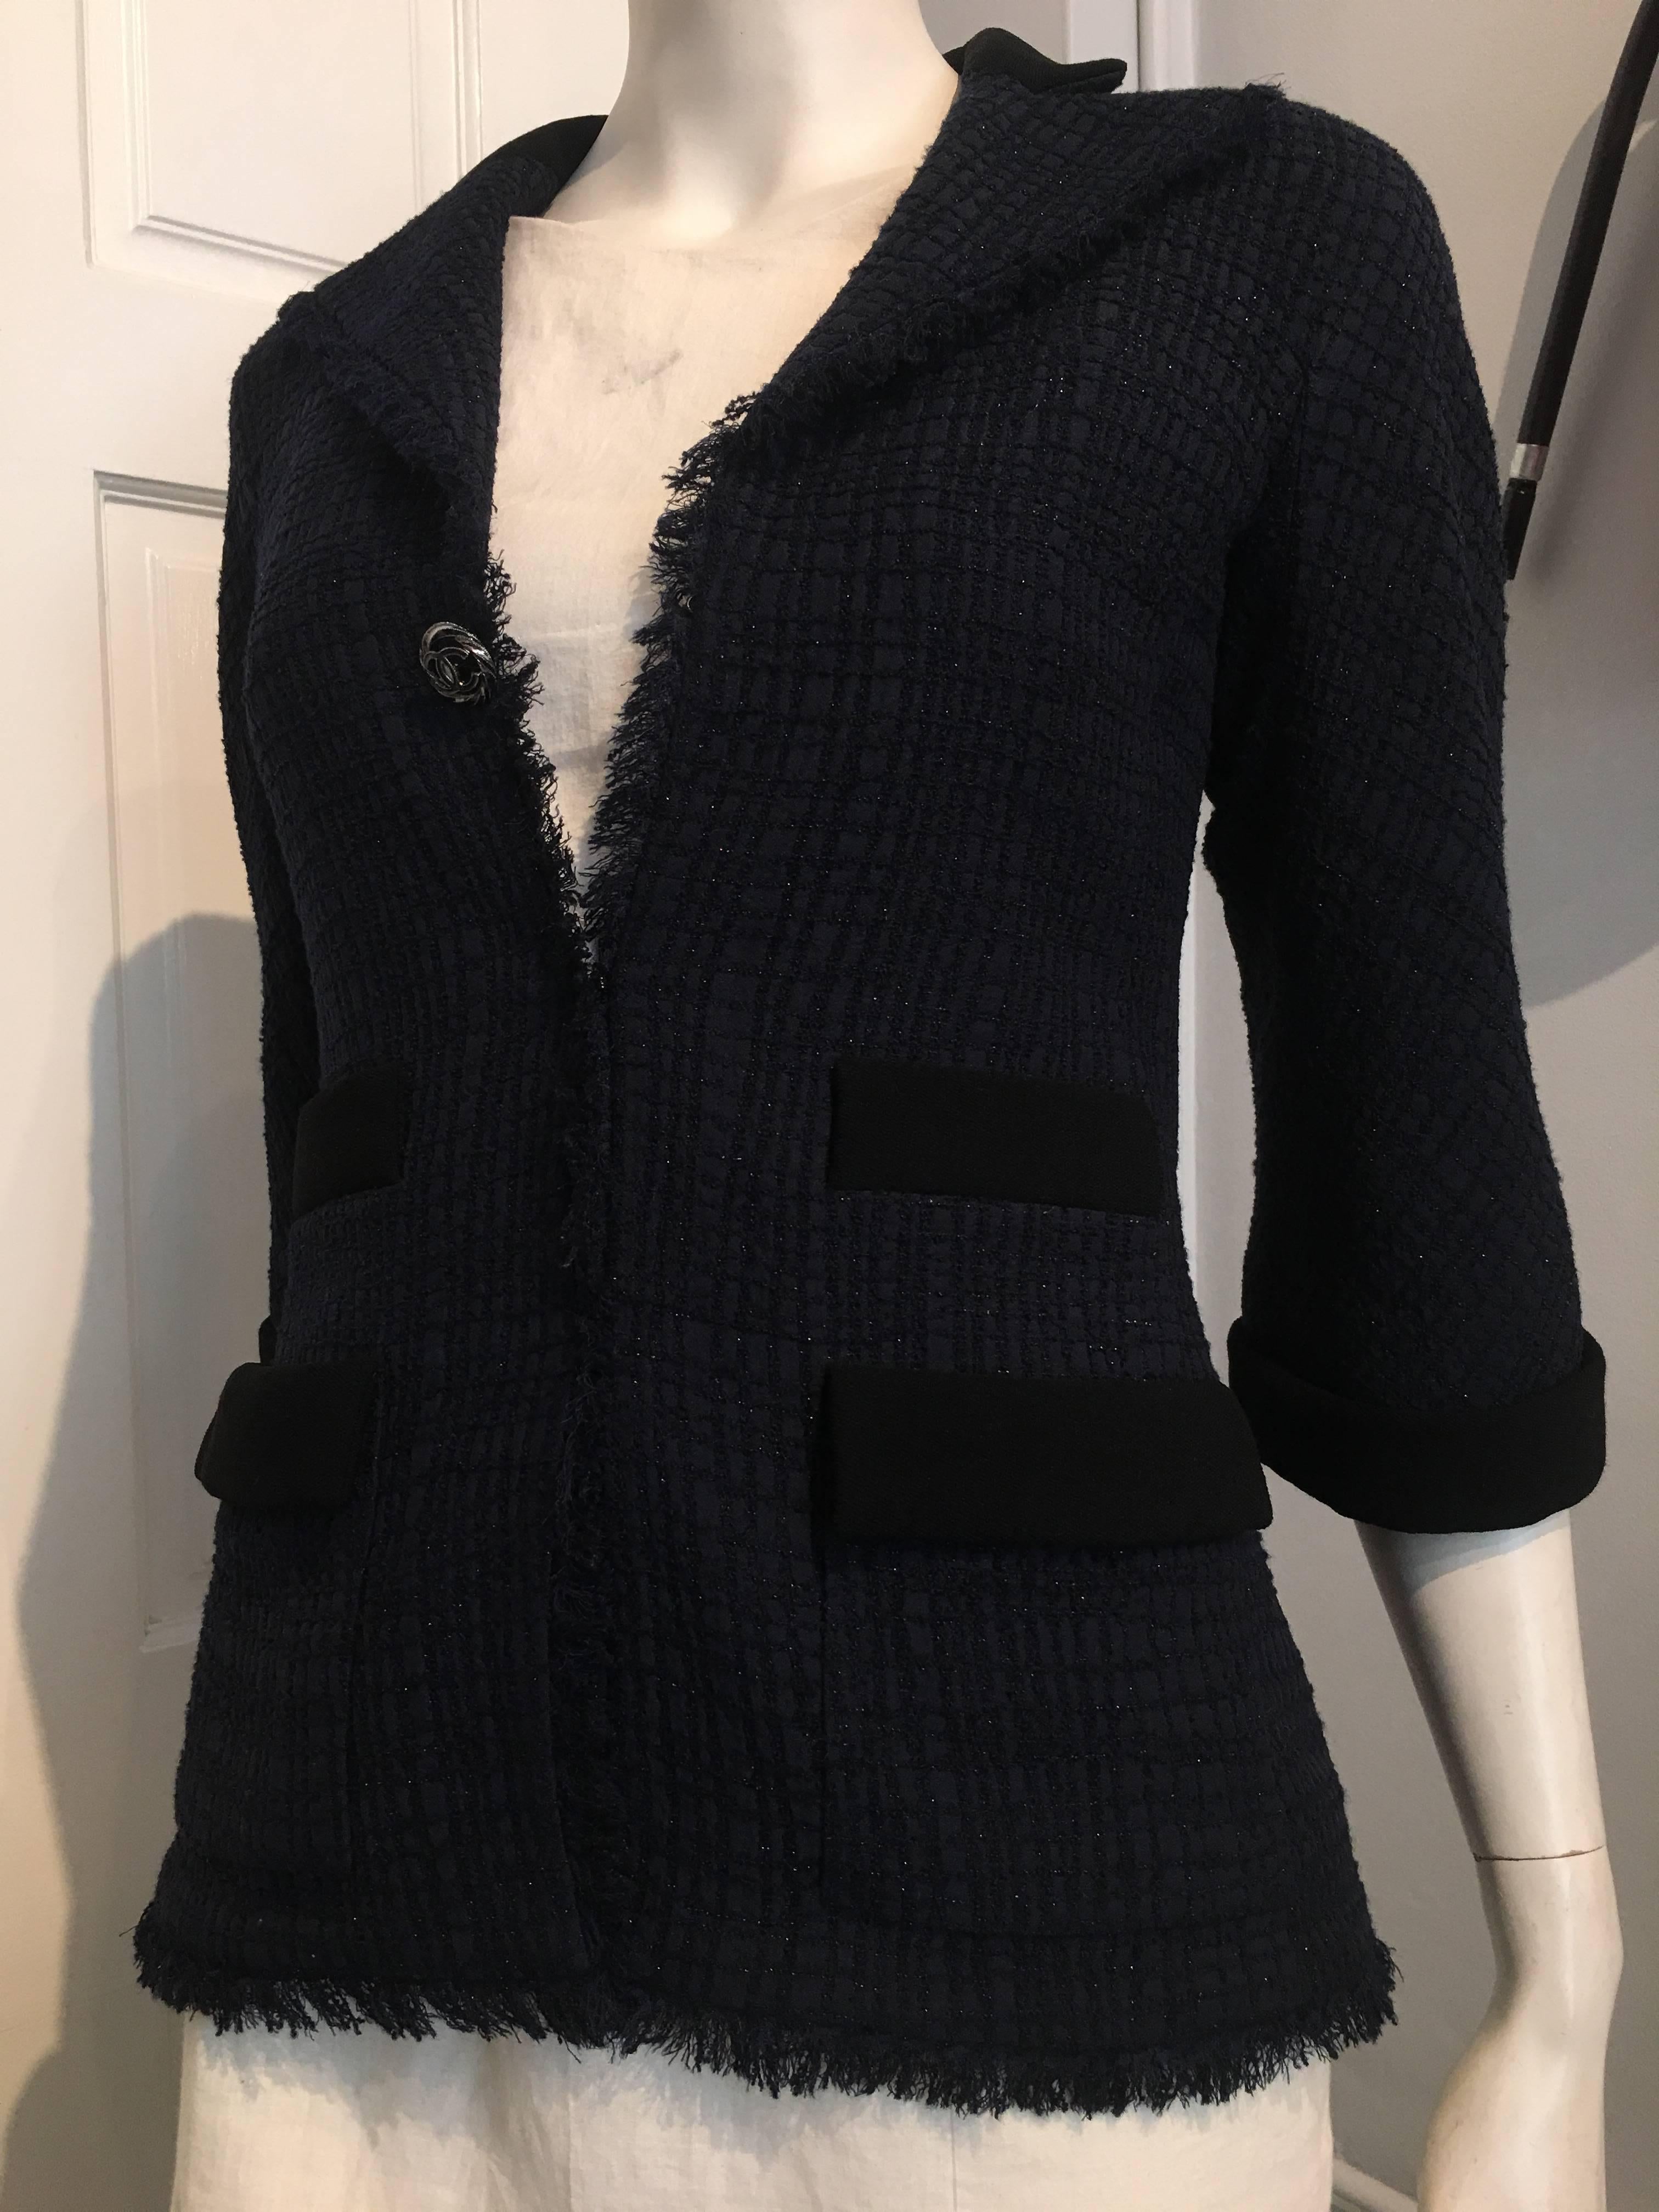 Chanel jacket in a sparkly navy fabric with black accents on collar, cuffs, and pocket flaps, and a narrow,  half inch fringe that runs along the lapels and hem. Each side of the jacket has one real lower pocket and faux top pocket, with black trim